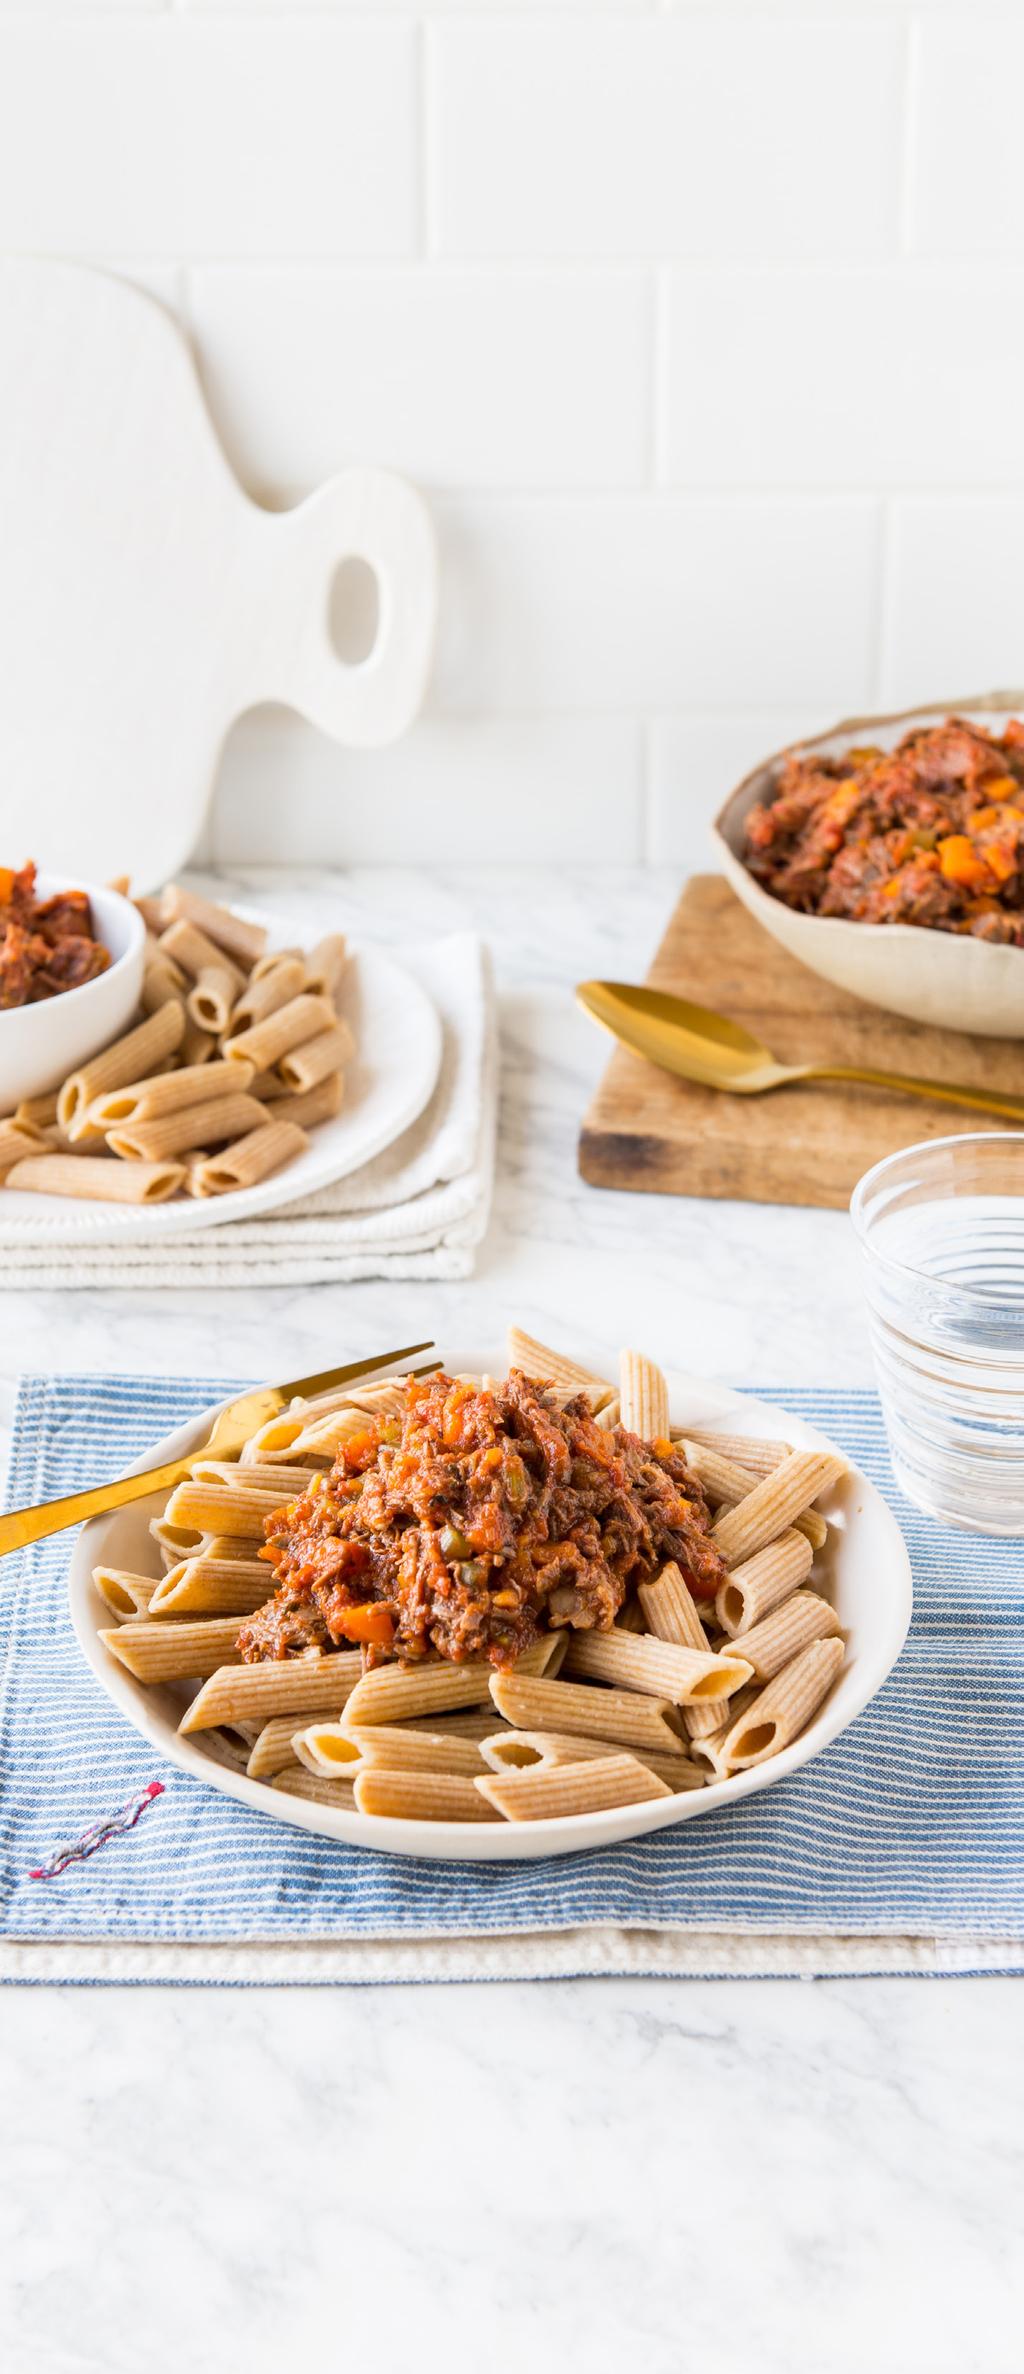 SLOW COOKER RAGU Prep Time: 2 mins Cooking Time: 480 mins This recipe will be a hit with the whole family. Make a large batch so you can freeze portions to use another time.